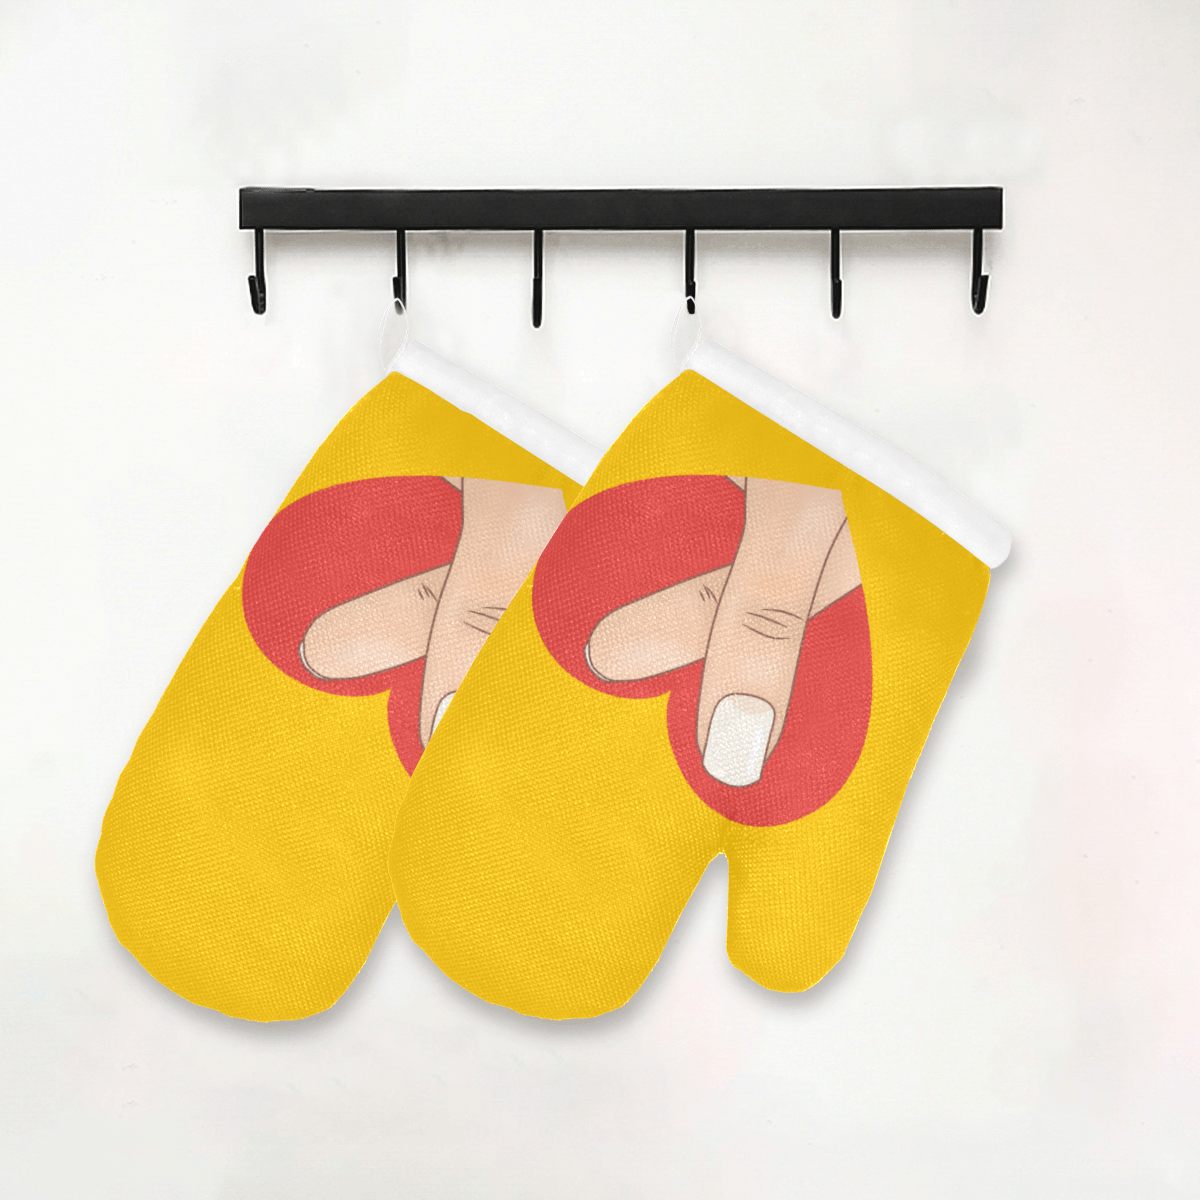 Red Heart Fingers on Yellow Oven Mitt (Two Pieces)